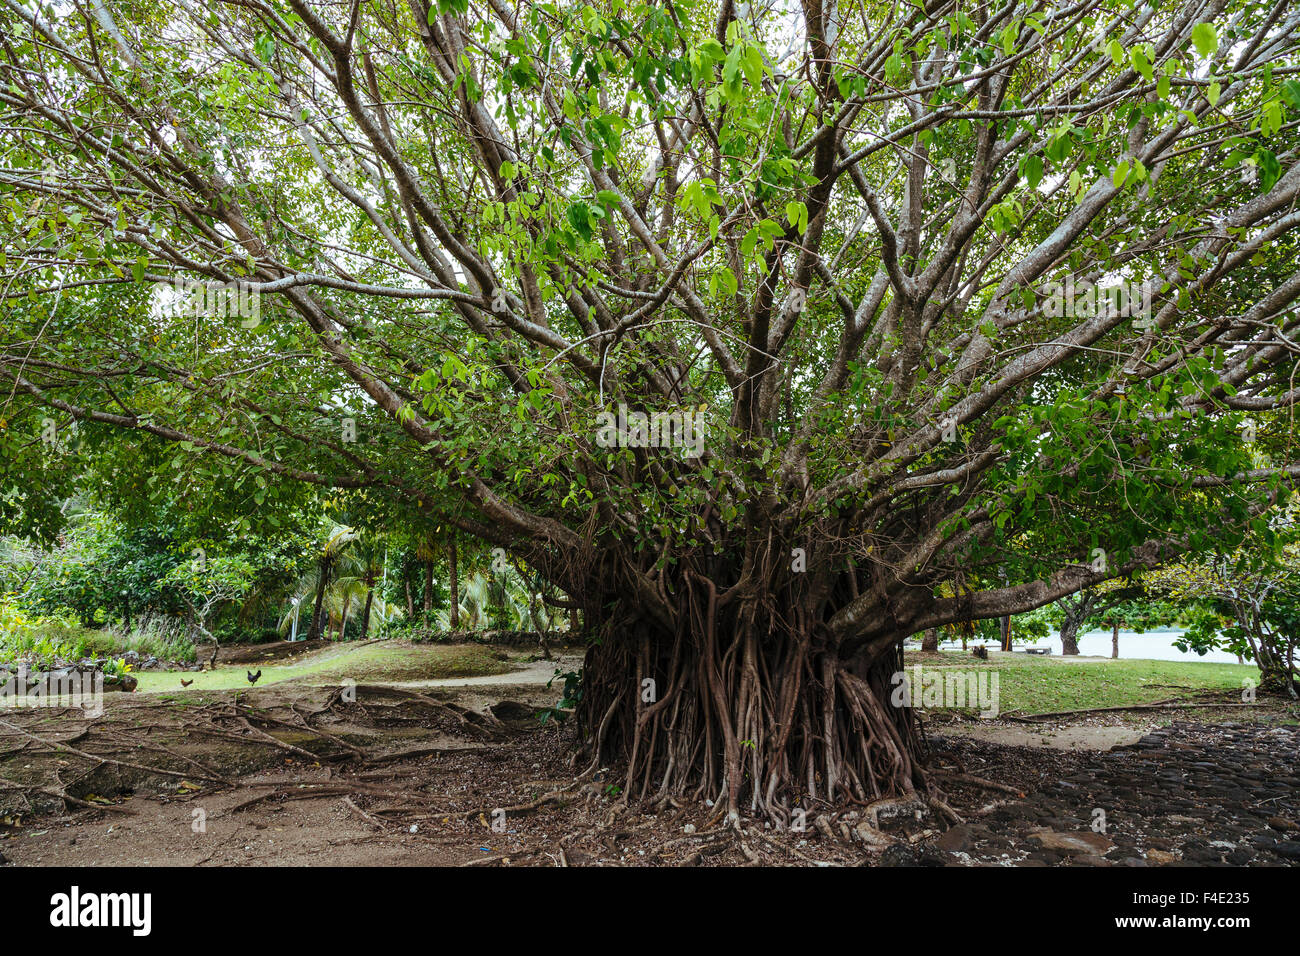 Pacific Ocean, French Polynesia, Society Islands, Raiatea. Tree at Taputapuatea Marae, once considered the central temple and religious center of Eastern Polynesia. Stock Photo